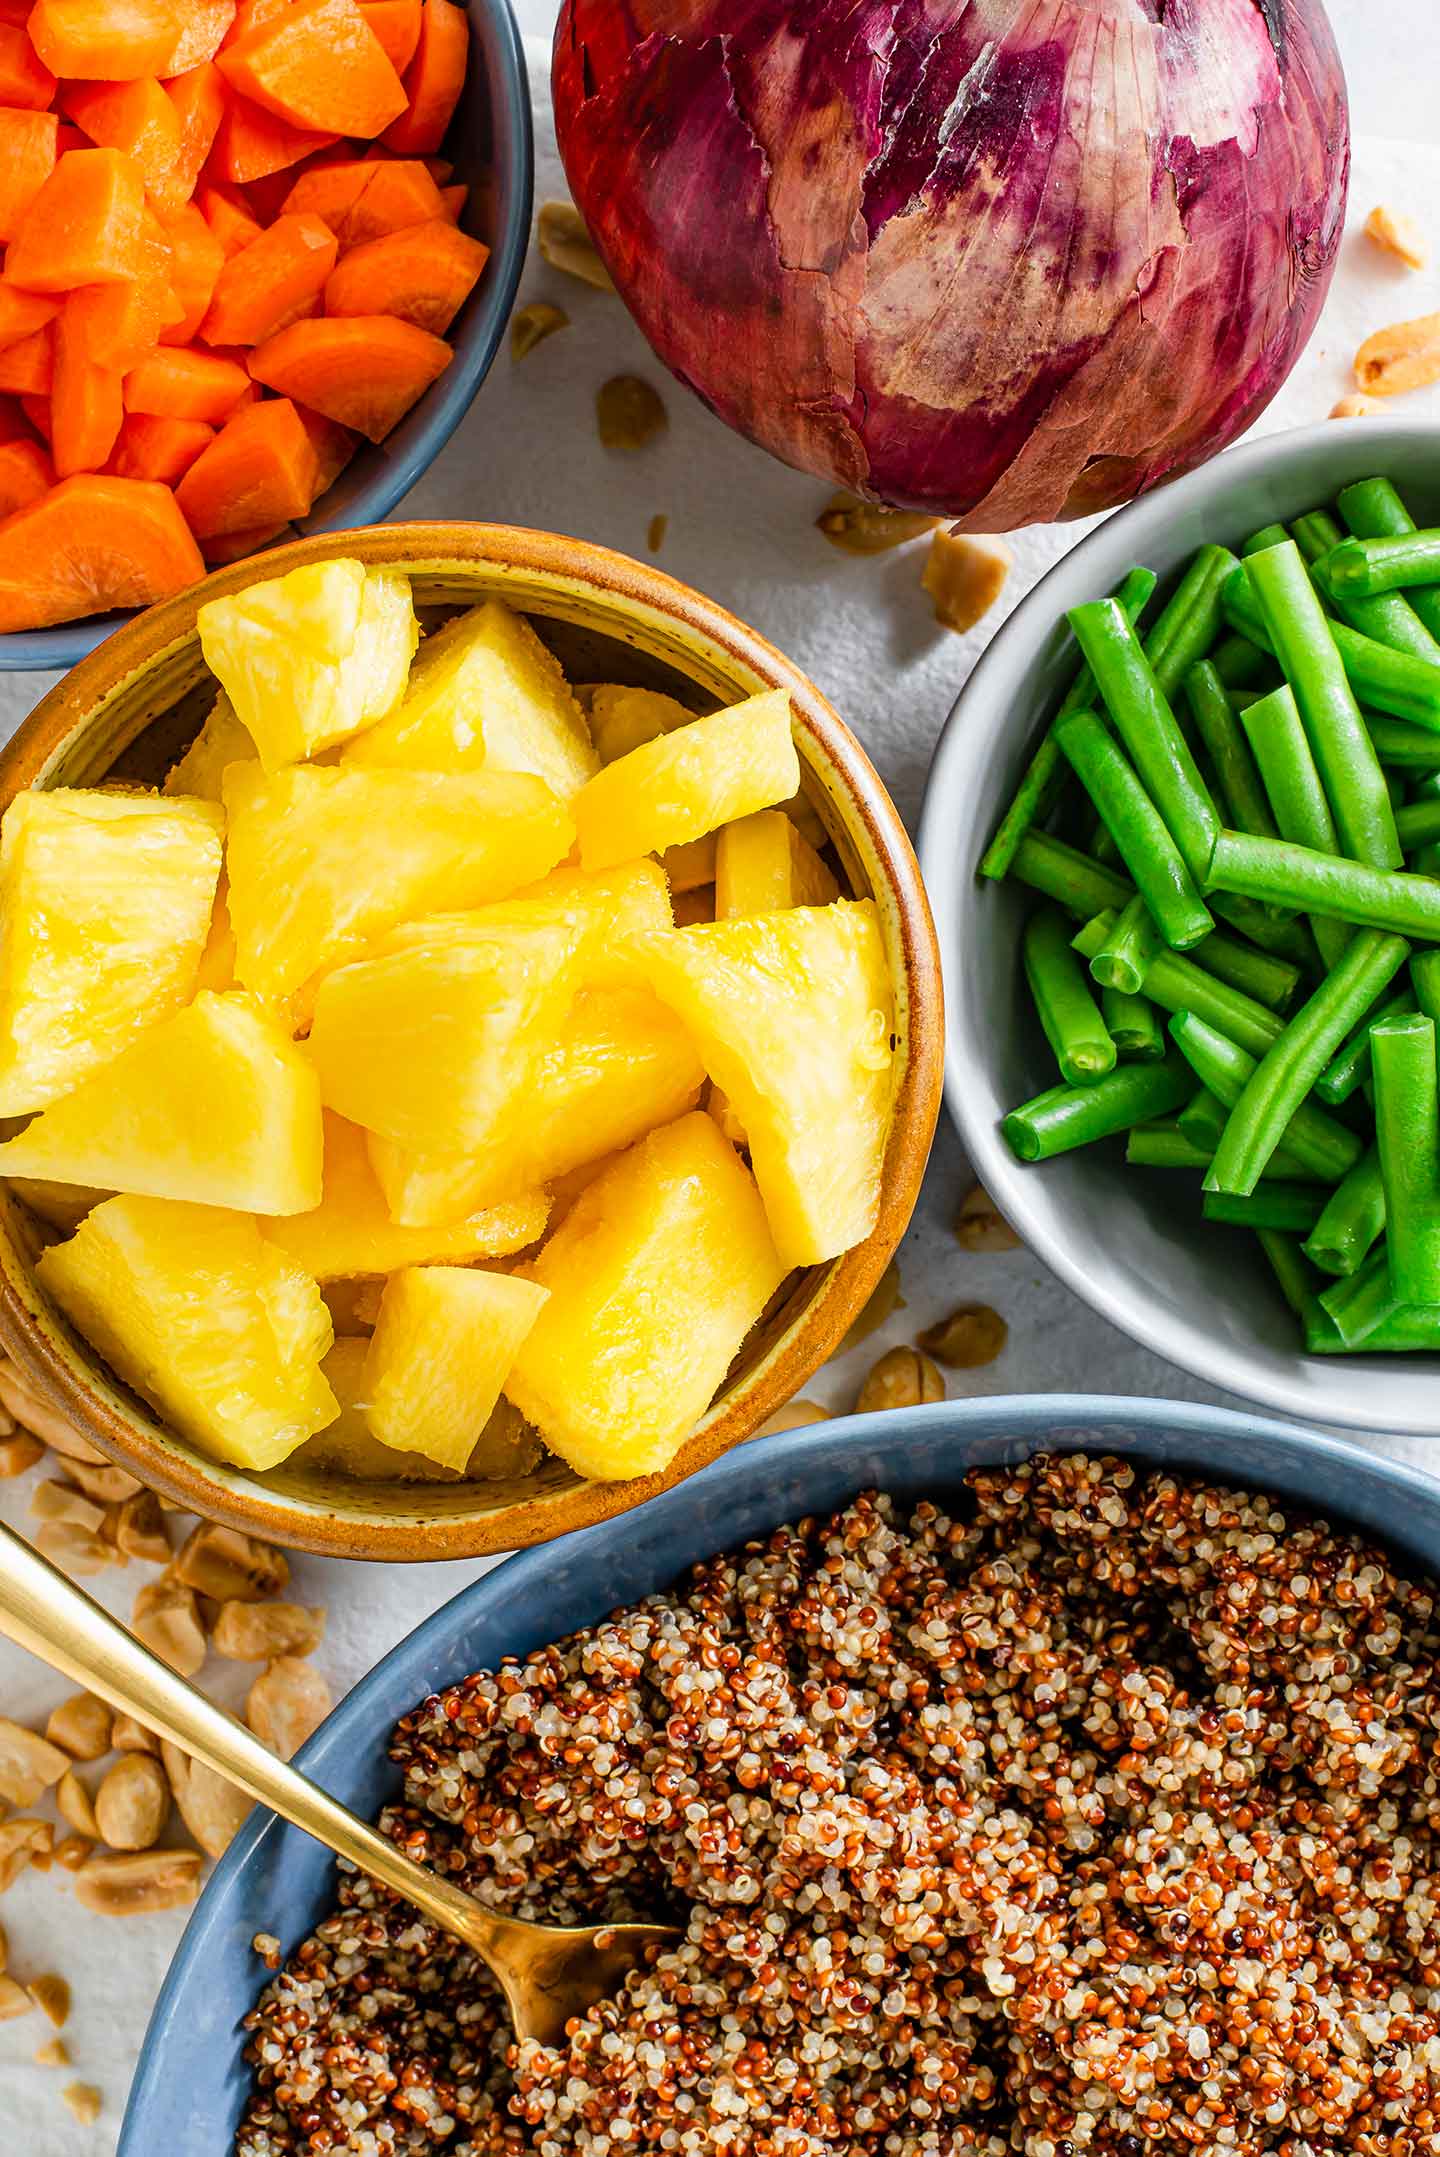 Top down view of pineapple, carrots, green beans, a red onion and a bowl of quinoa displayed on a white tray sprinkled with roasted peanuts.